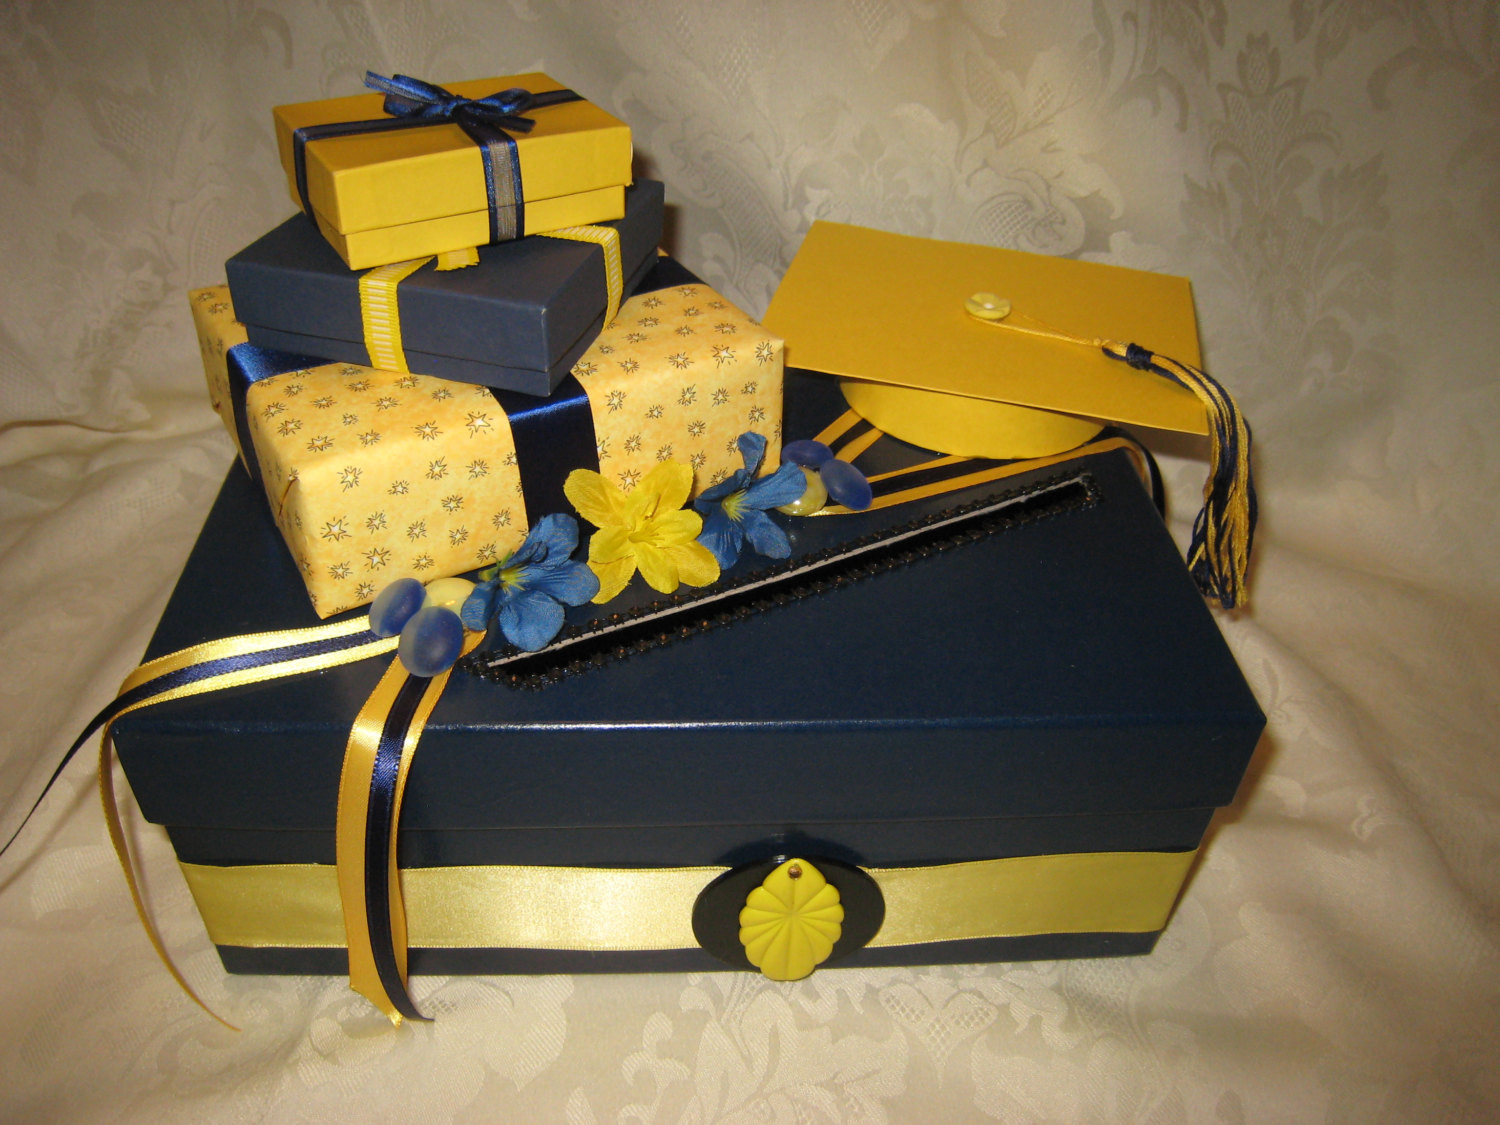 Graduation Party Ideas Blue And Gold
 Navy Blue Gold Yellow Graduation Party Card Box